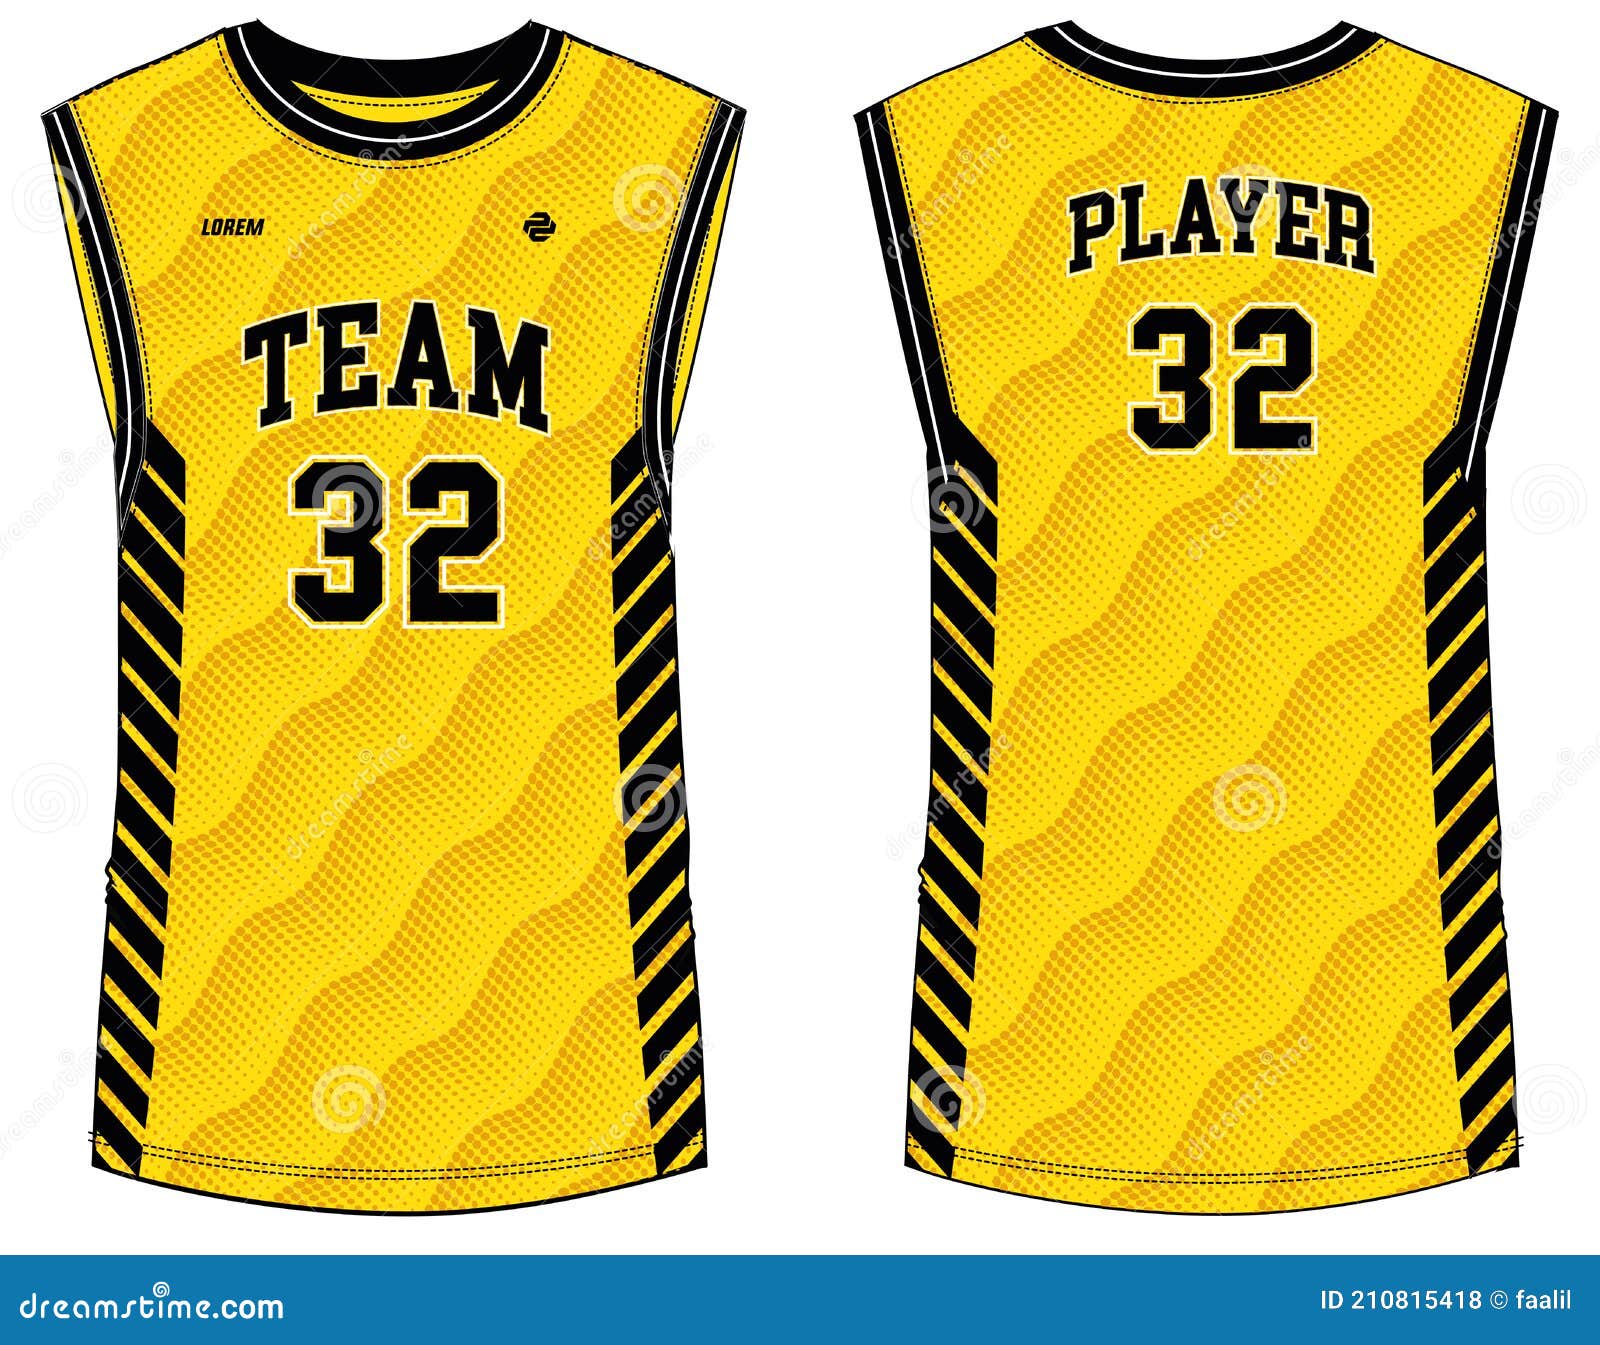 Sleeveless Tank Top Basketball jersey vest design t-shirt template, sports  jersey concept with front and back view for Men and women. Basketball,  Volleyball, Running, tennis, badminton uniform. Stock Vector